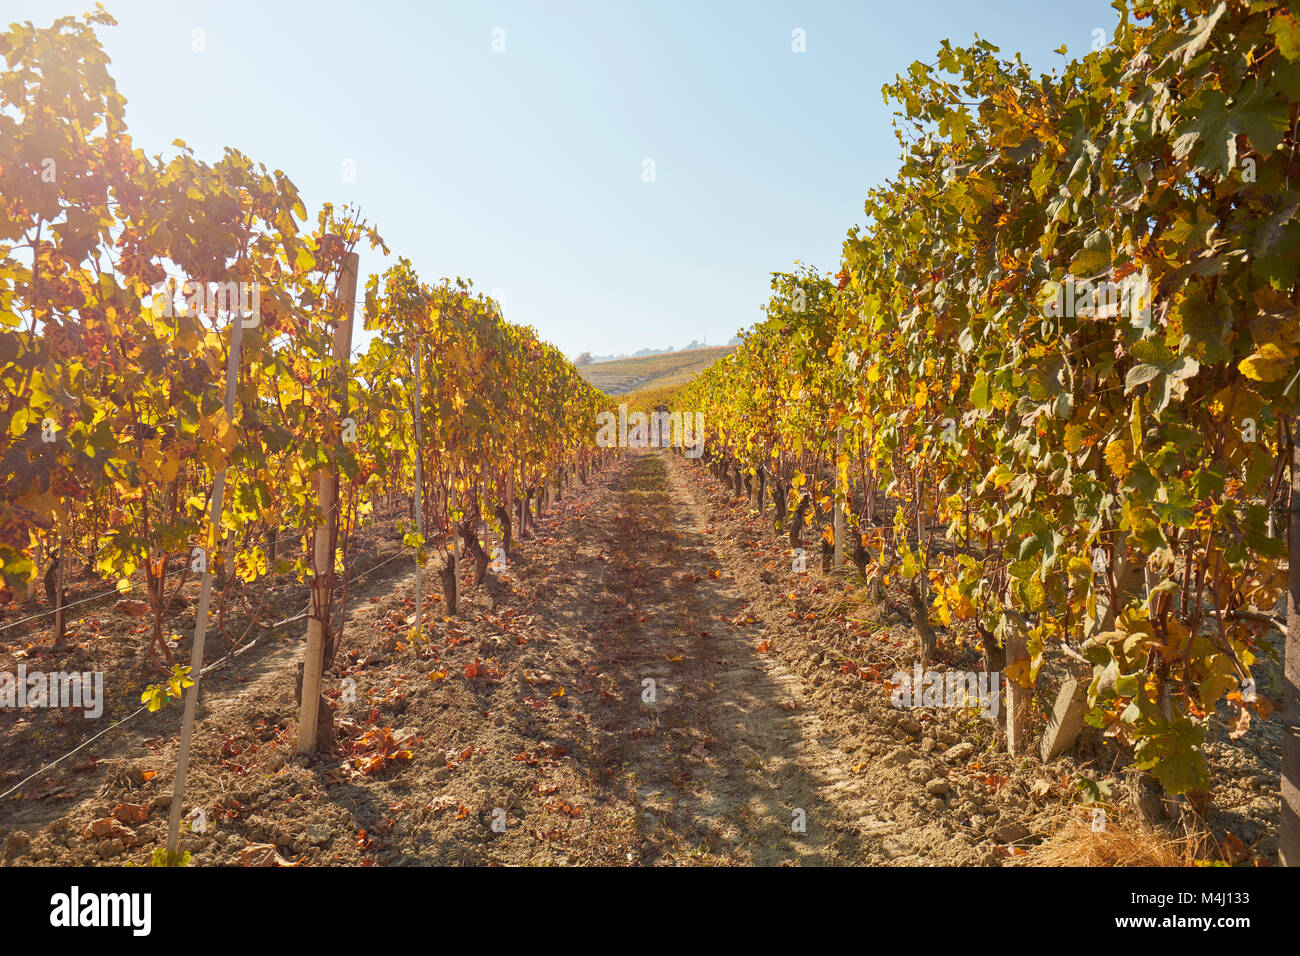 Vineyard, path between two vine rows in autumn with yellow leaves, sun beams Stock Photo